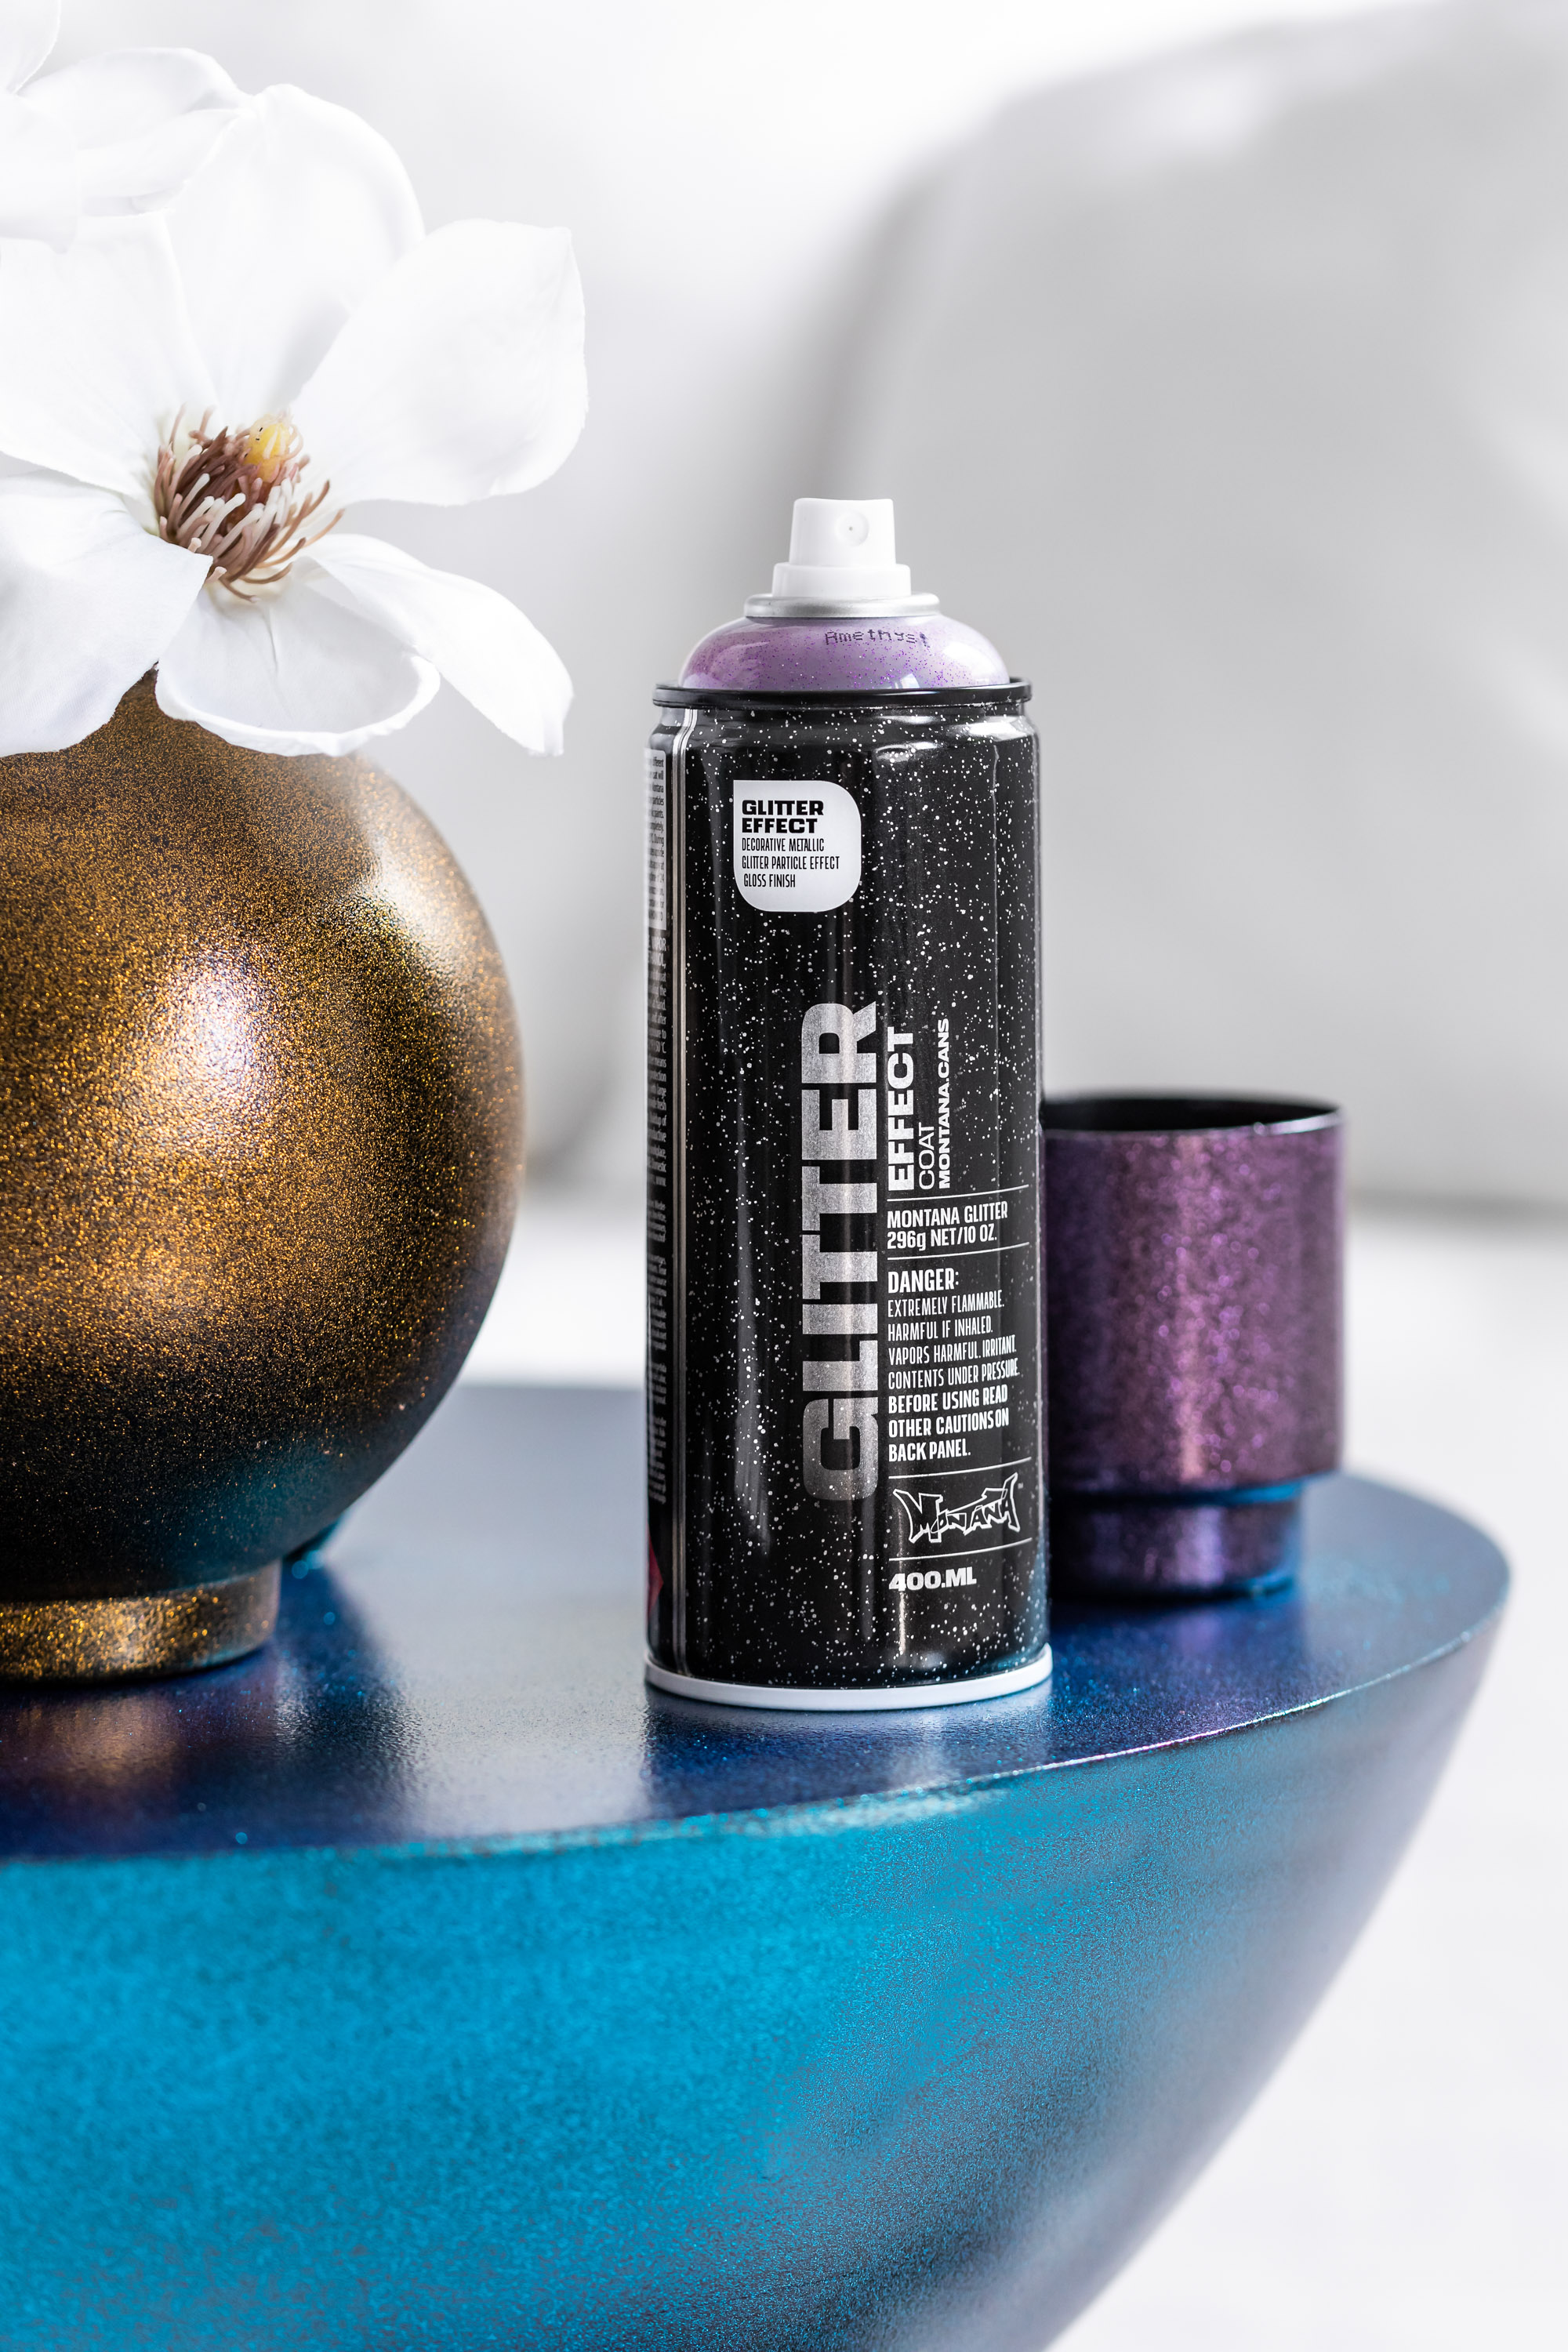  Customer reviews: Montana Cans Montana Effect 400 ml Hologram  Glitter Color, Clear Spray Paint